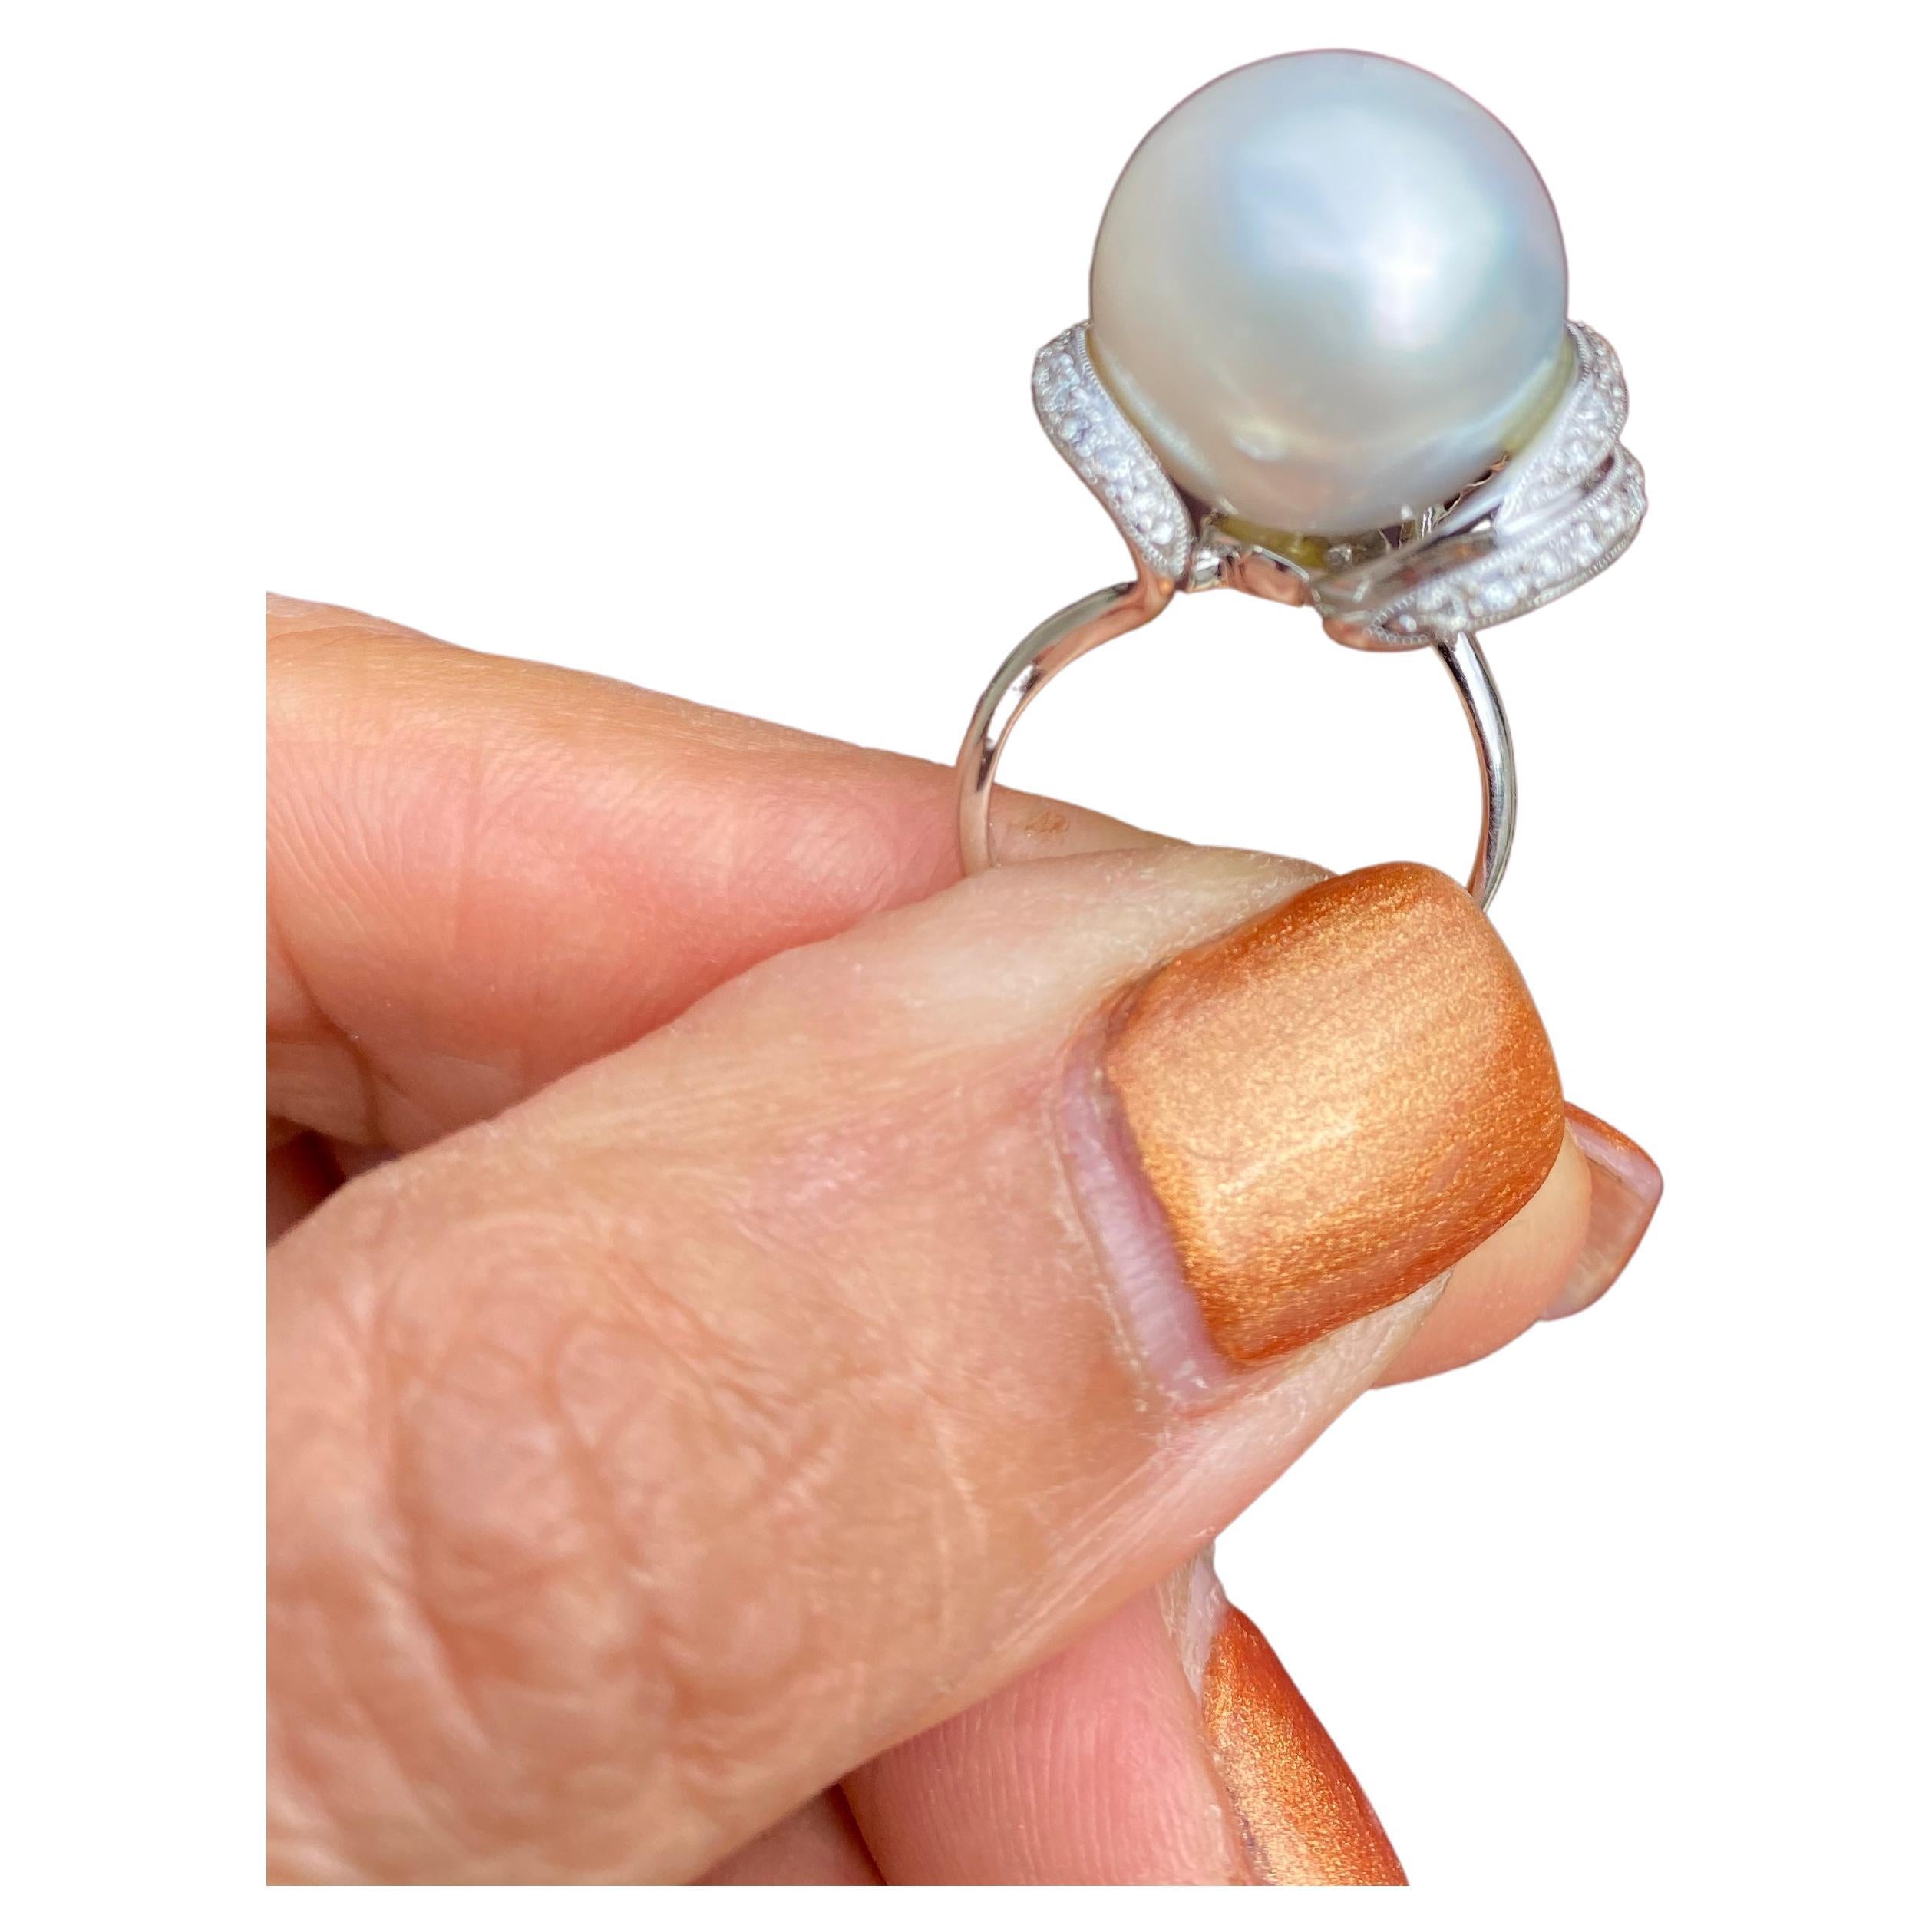 Showcasing a 15.50 mm White South Sea Pearl set with Diamonds in this 18 karats white gold Ring 
A luxurious, white glowing pearl of AAA quality is set in a Contemporary setting with three bars of diamonds. Each bar is charged with pave diamonds